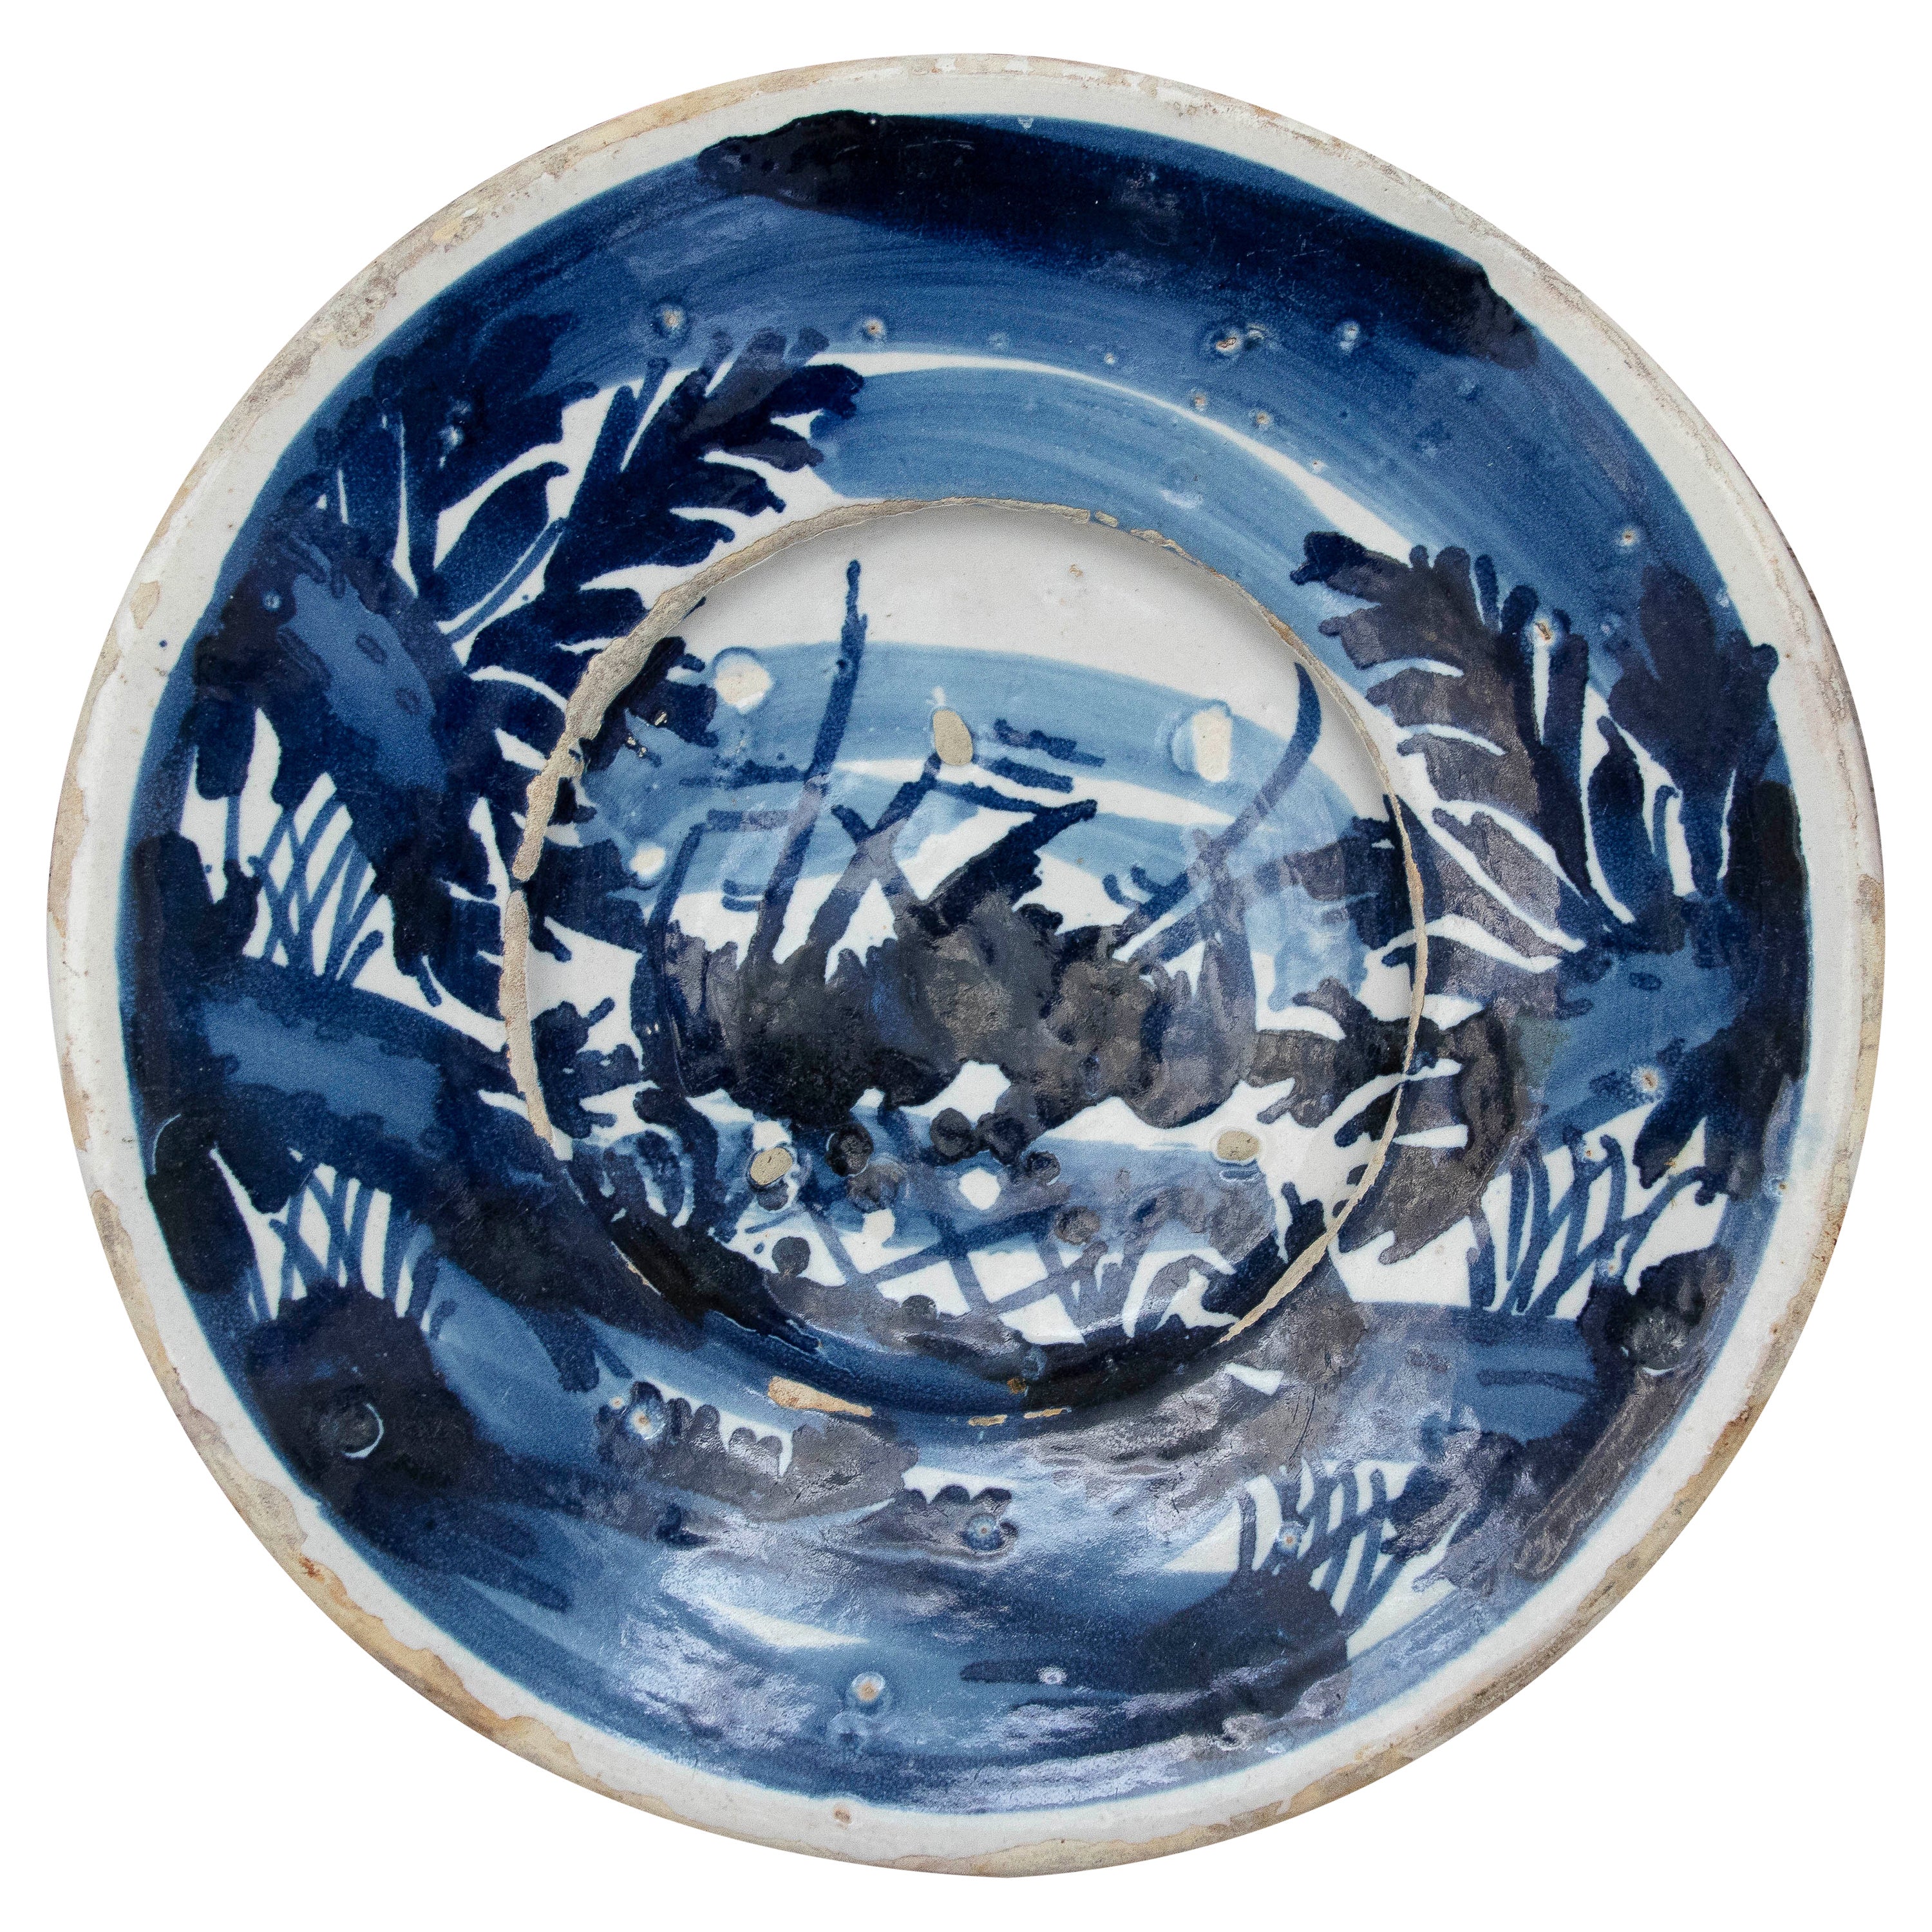 18th Century Spanish Ceramic Plate with a Country Scene